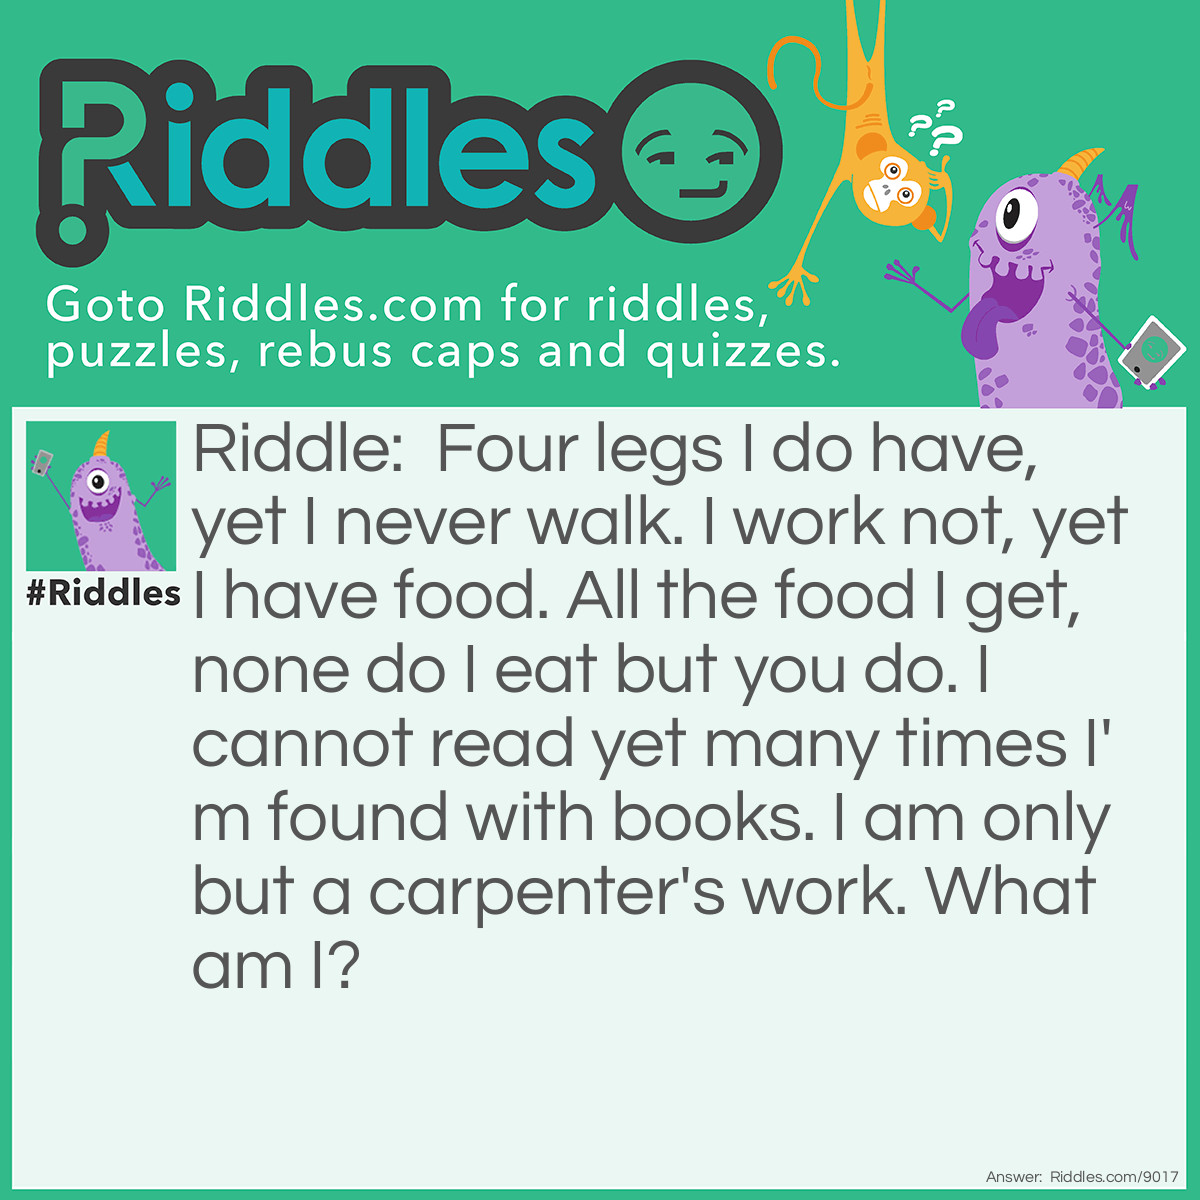 Riddle: Four legs I do have, yet I never walk. I work not, yet I have food. All the food I get, none do I eat but you do. I cannot read yet many times I'm found with books. I am only but a carpenter's work. What am I? Answer: A table.